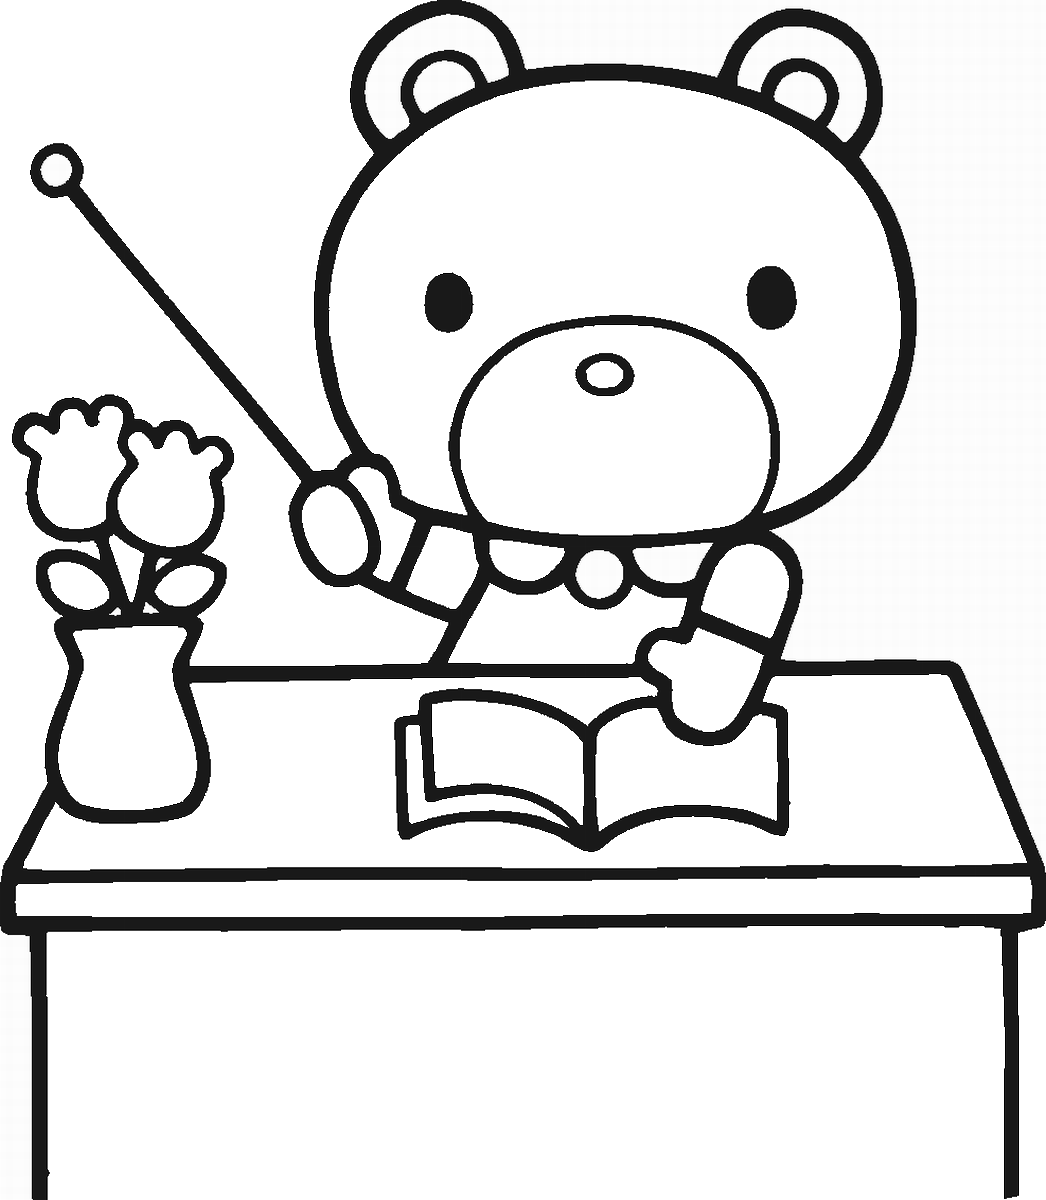 Hello Kitty Coloring Pages Cartoons hello_kitty_cl35 Printable 2020 3169 Coloring4free